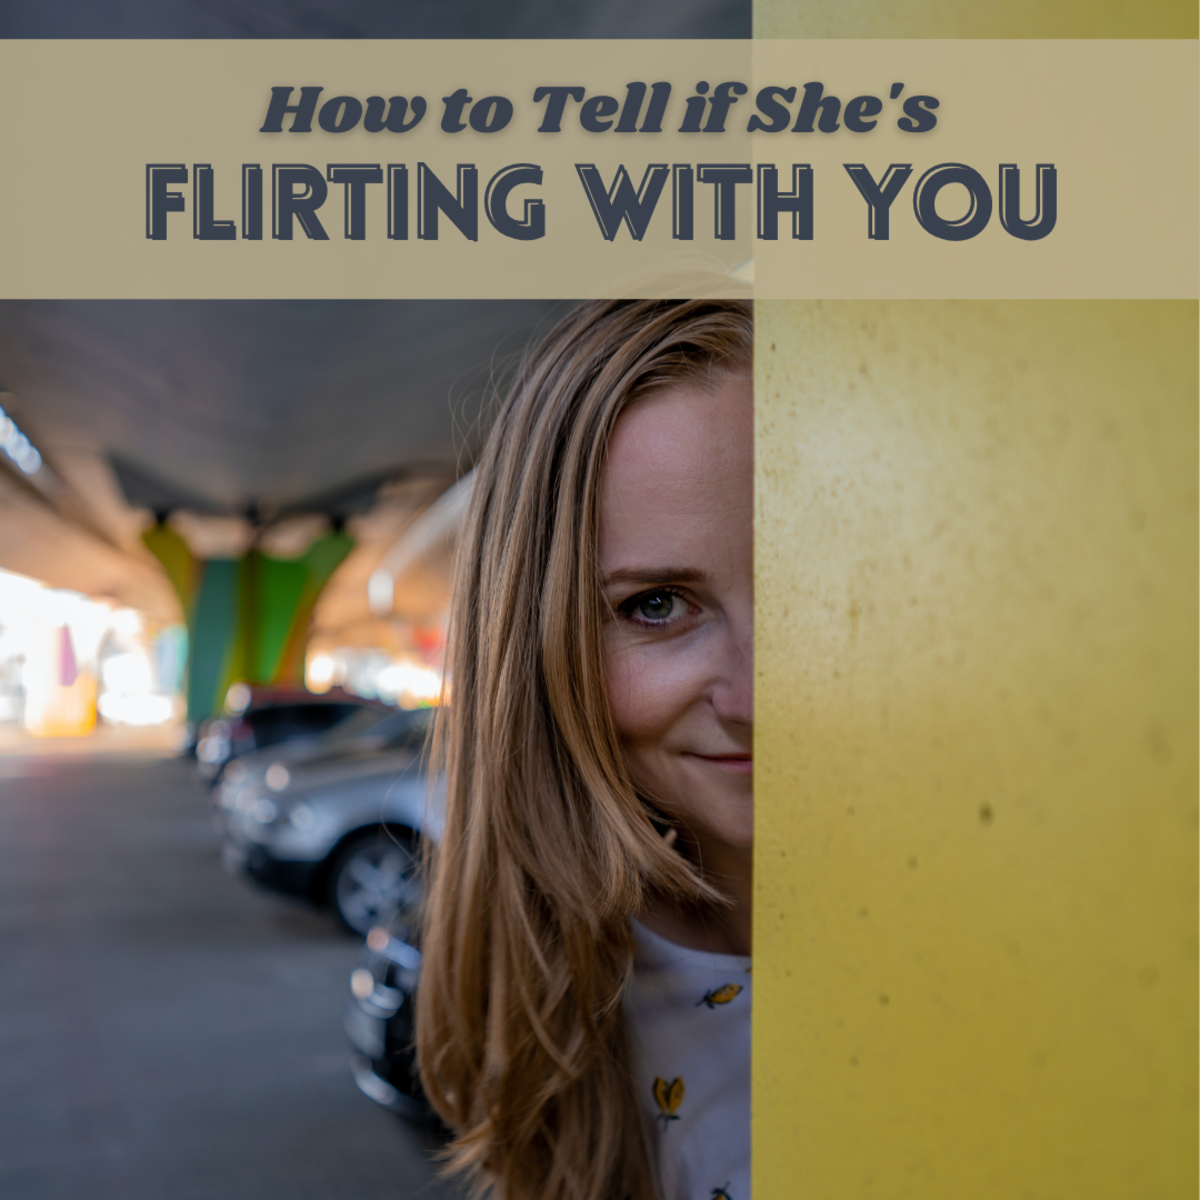 Is she flirting? Find out here!